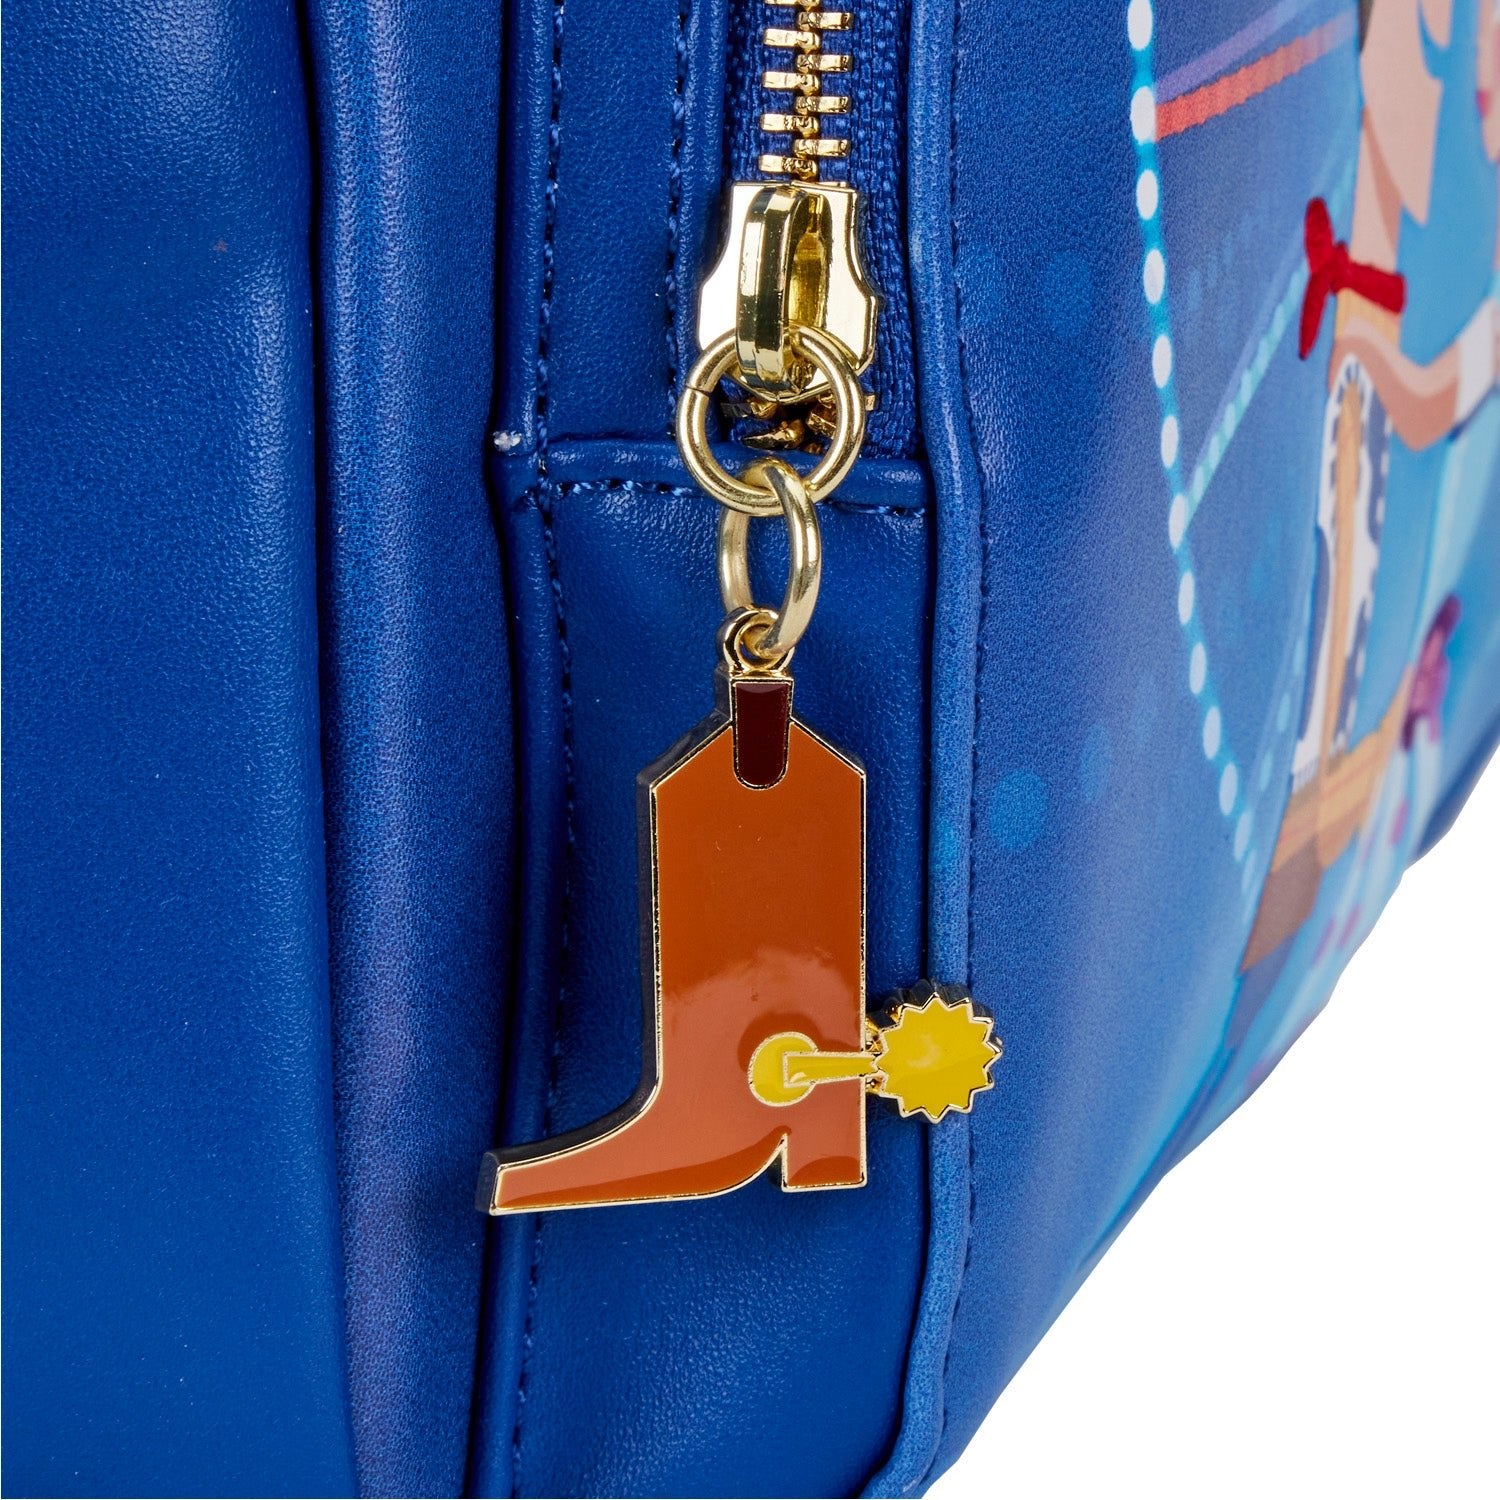 Loungefly x Disney Pixar Toy Story Woody and Bo Peep Mini Backpack - GeekCore